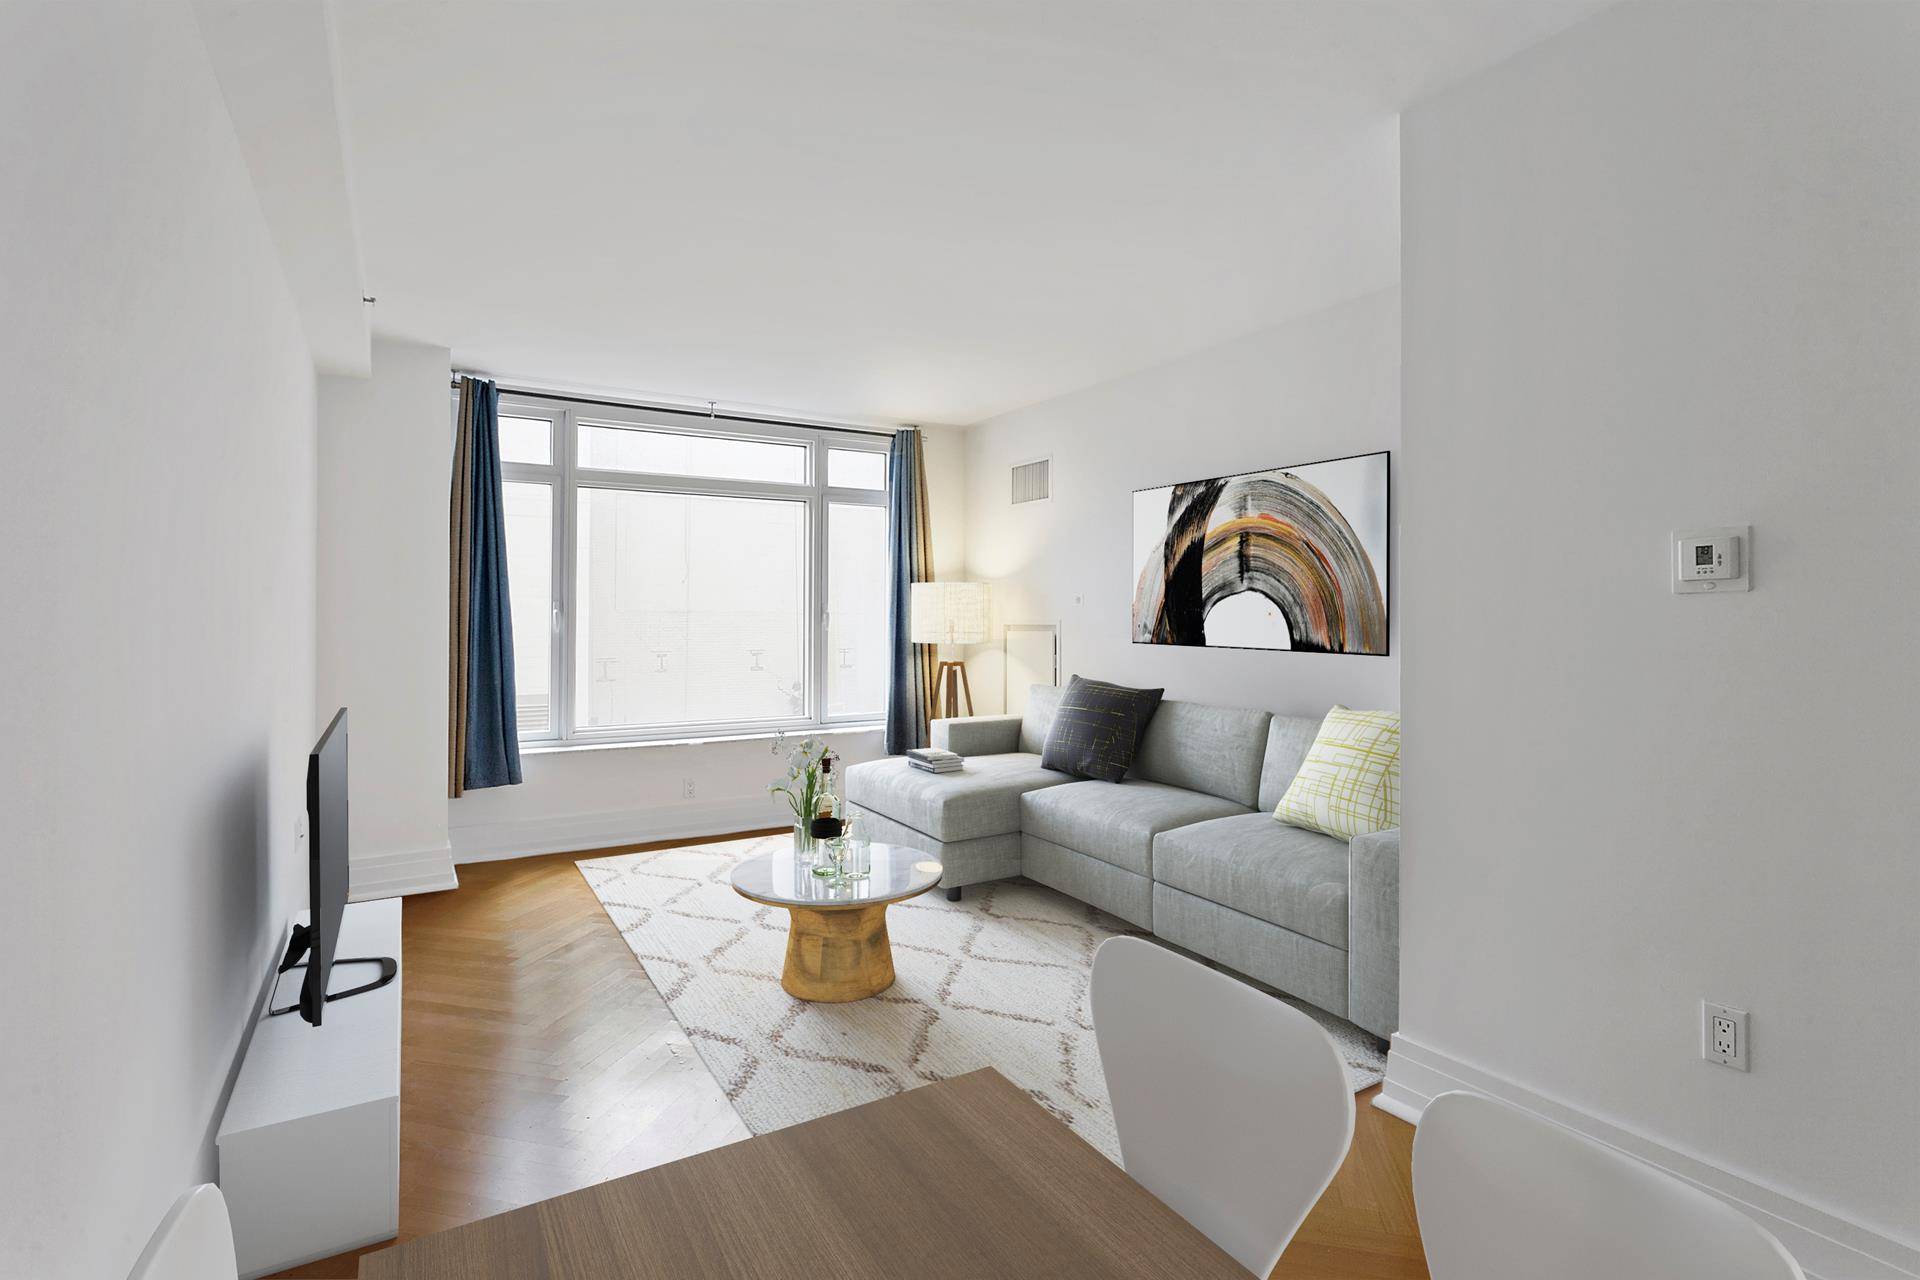 Beautiful and elegant one bedroom residence available for rent at The Brompton Condominium in the Upper East Side.